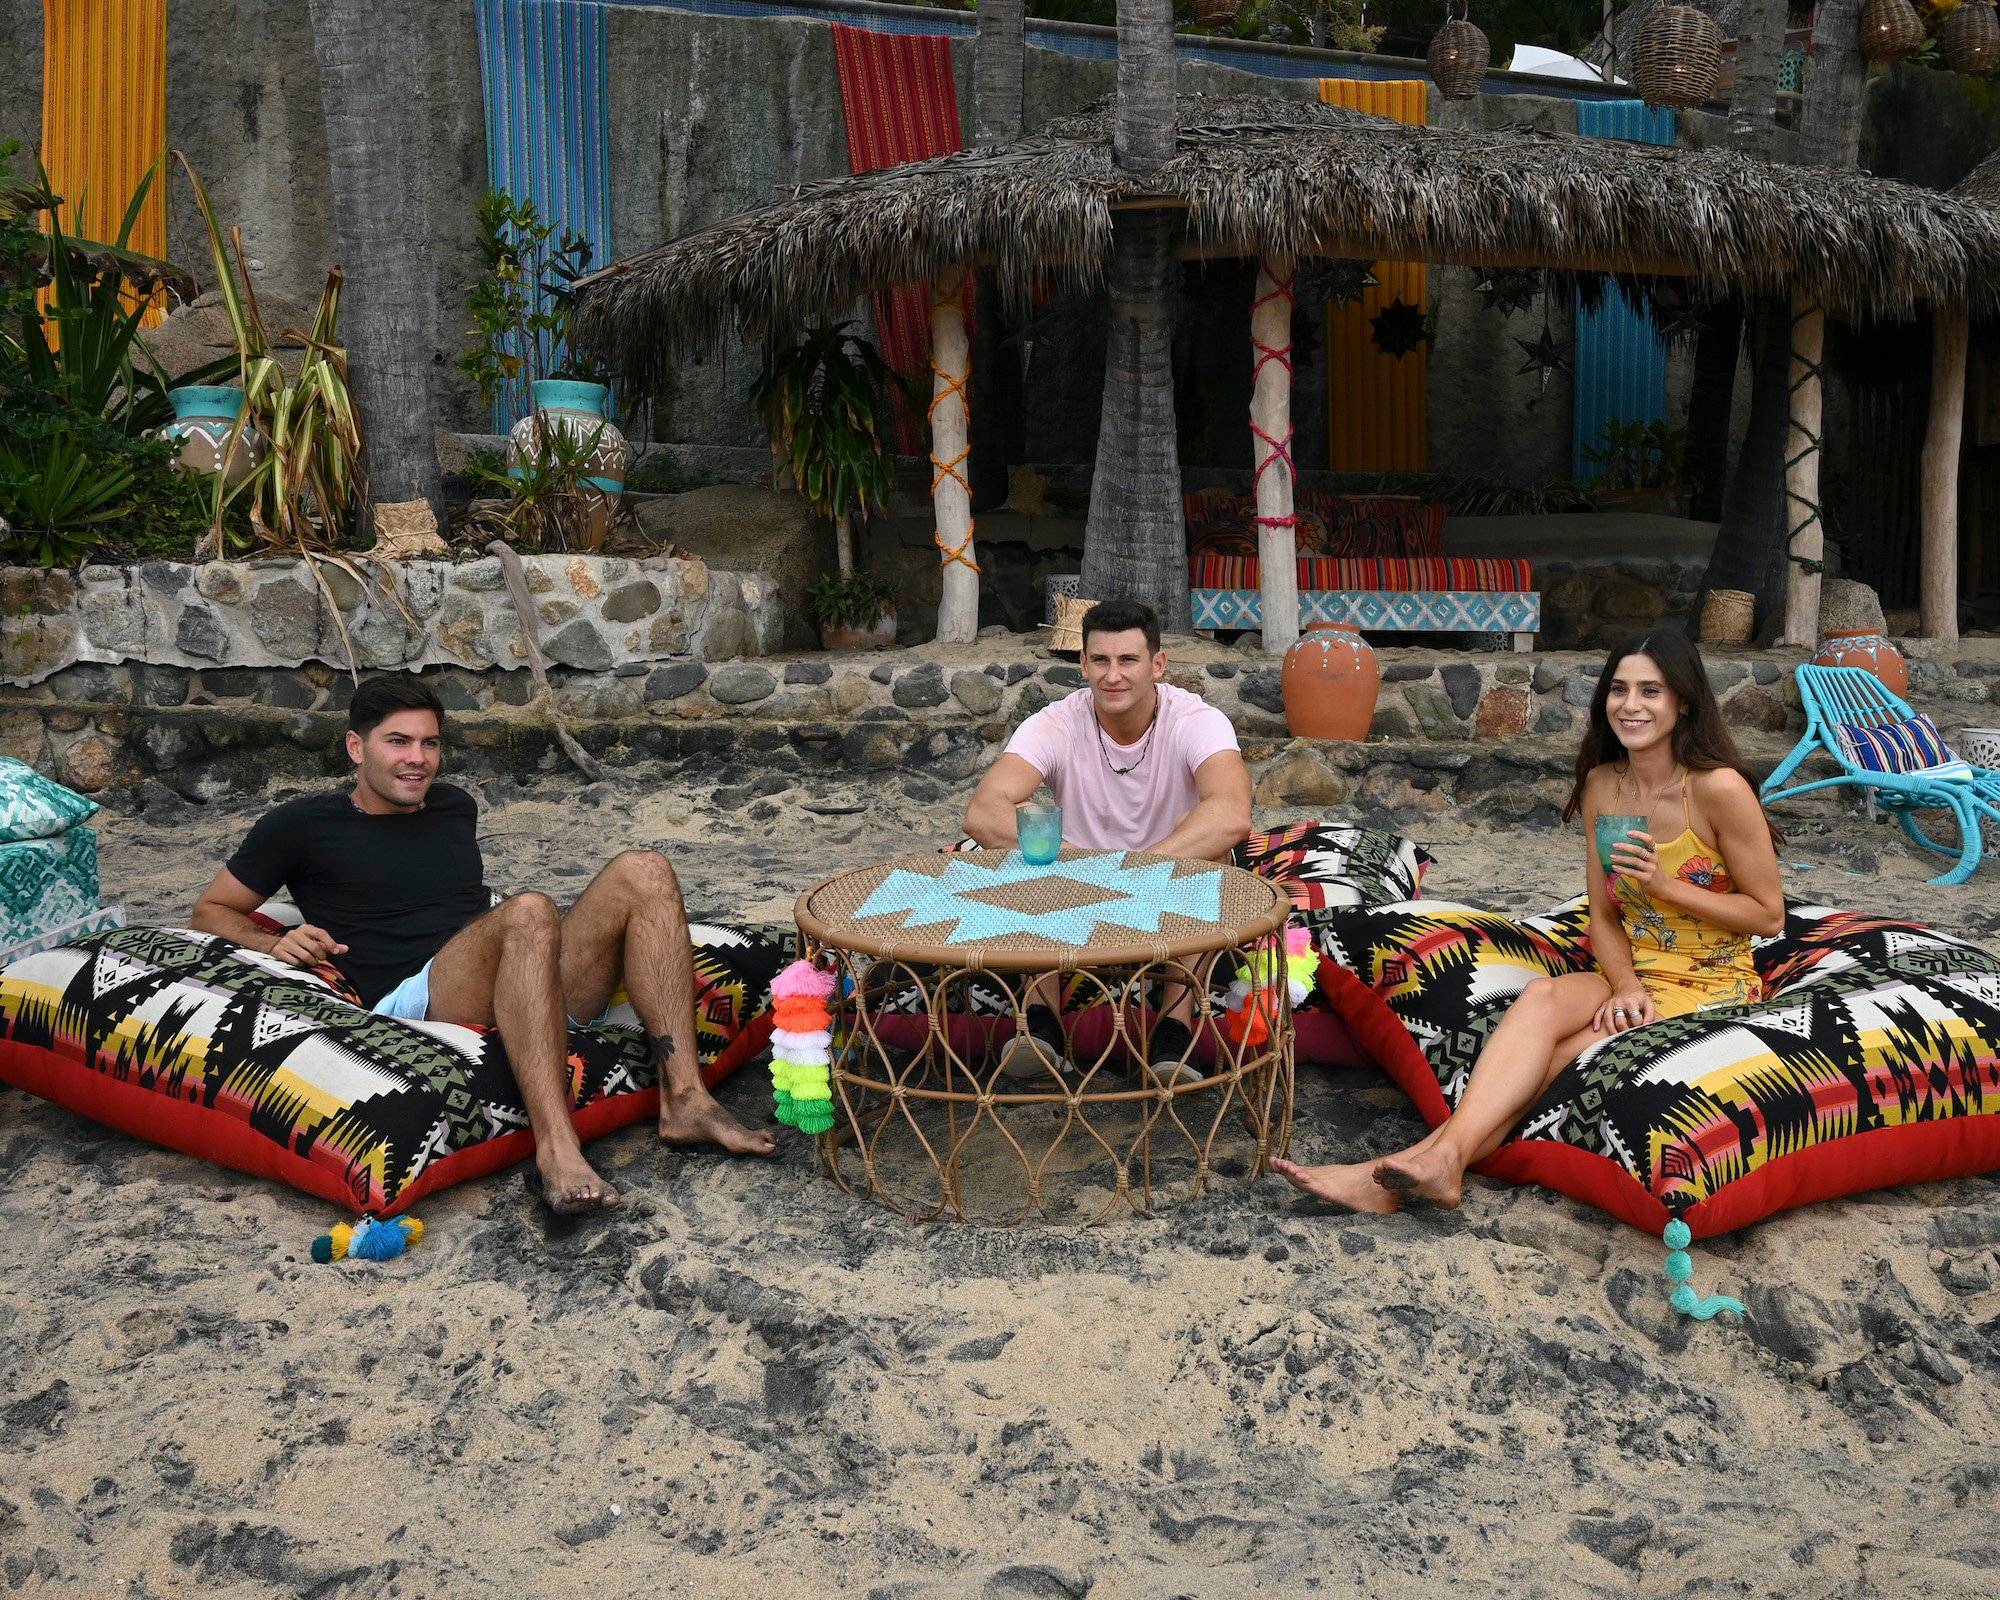 Bachelor In Paradise cast members gathered around a fire pit on a beach